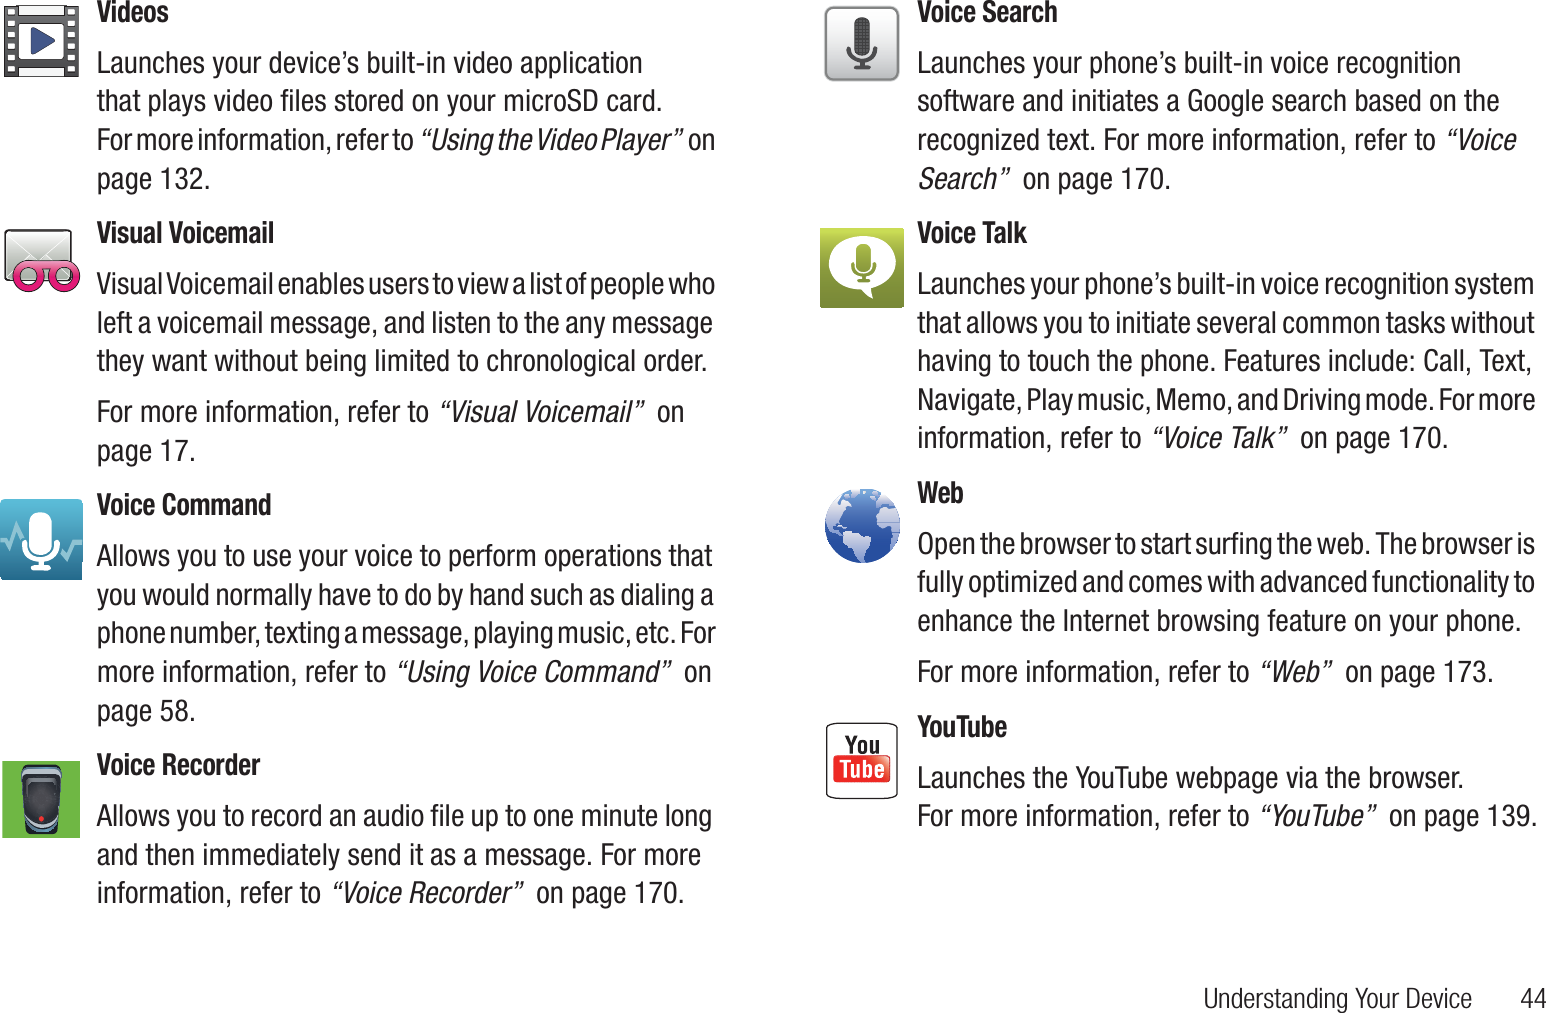 Understanding Your Device       44VideosLaunches your device’s built-in video application that plays video files stored on your microSD card. For more information, refer to “Using the Video Player”  on page 132.Visual VoicemailVisual Voicemail enables users to view a list of people who left a voicemail message, and listen to the any message they want without being limited to chronological order.For more information, refer to “Visual Voicemail”  on page 17.Voice CommandAllows you to use your voice to perform operations that you would normally have to do by hand such as dialing a phone number, texting a message, playing music, etc. For more information, refer to “Using Voice Command”  on page 58.Voice RecorderAllows you to record an audio file up to one minute long and then immediately send it as a message. For more information, refer to “Voice Recorder”  on page 170.Voice SearchLaunches your phone’s built-in voice recognition software and initiates a Google search based on the recognized text. For more information, refer to “Voice Search”  on page 170.Voice TalkLaunches your phone’s built-in voice recognition system that allows you to initiate several common tasks without having to touch the phone. Features include: Call, Text, Navigate, Play music, Memo, and Driving mode. For more information, refer to “Voice Talk”  on page 170.WebOpen the browser to start surfing the web. The browser is fully optimized and comes with advanced functionality to enhance the Internet browsing feature on your phone.For more information, refer to “Web”  on page 173.YouTubeLaunches the YouTube webpage via the browser.  For more information, refer to “YouTube”  on page 139.